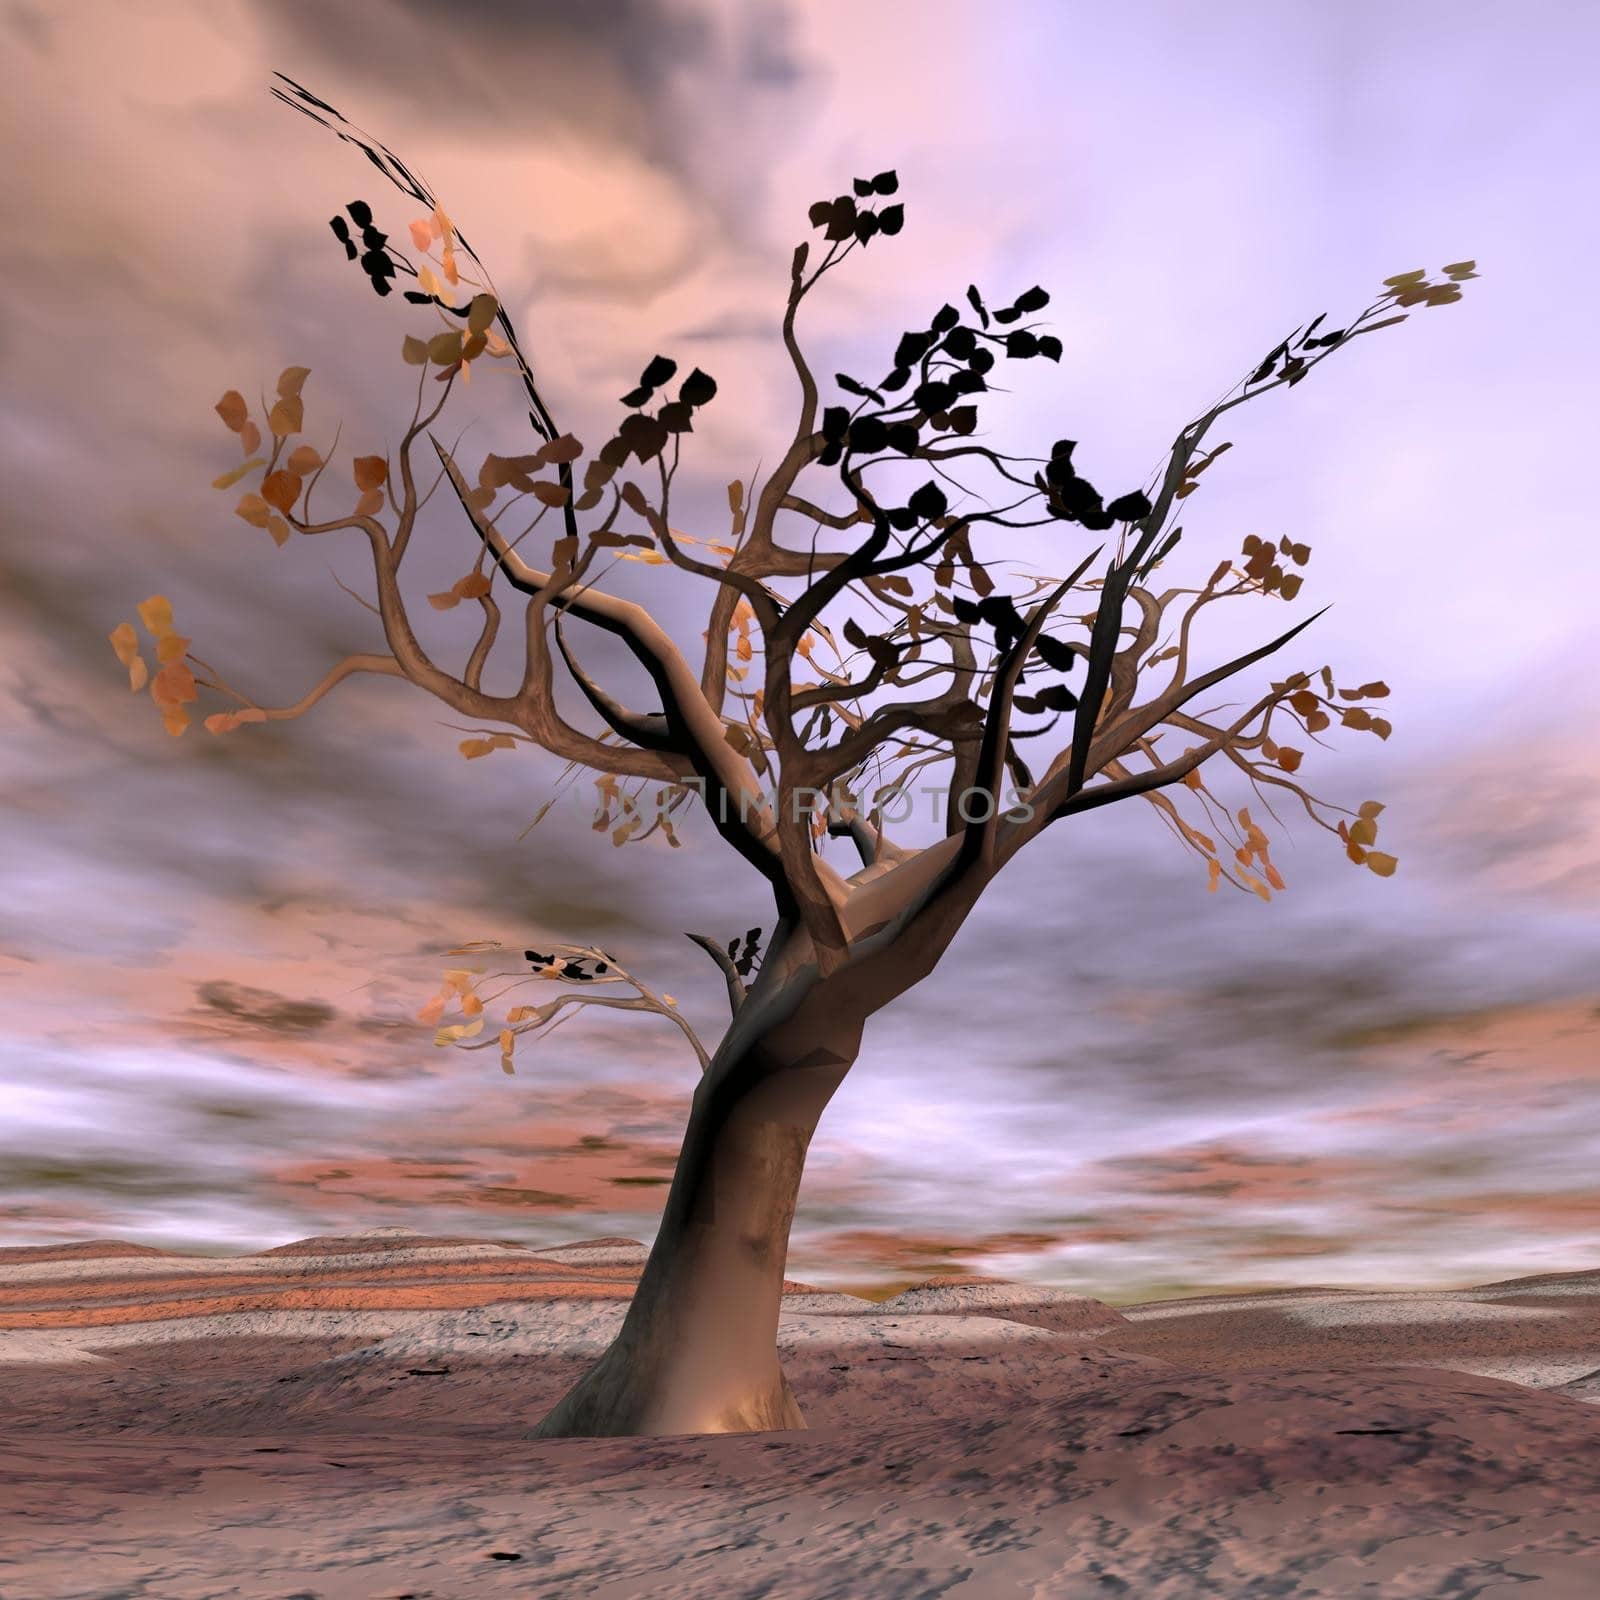 Beautiful autumn fantasy tree in desert landscape by colorful sunset